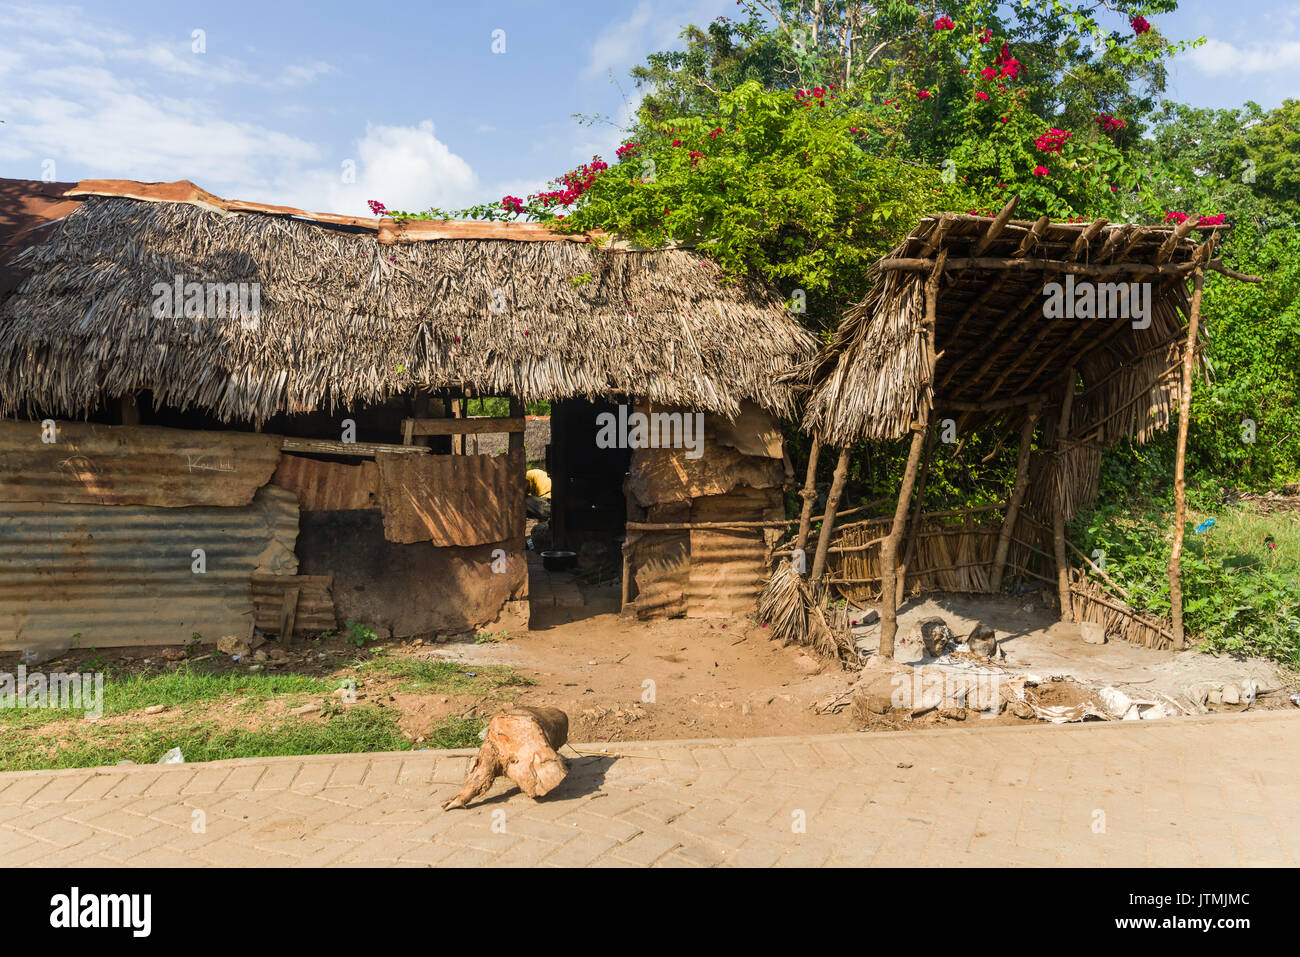 Corrugated iron and wooden shack building with dried palm leaf thatch roof, Kenya Stock Photo